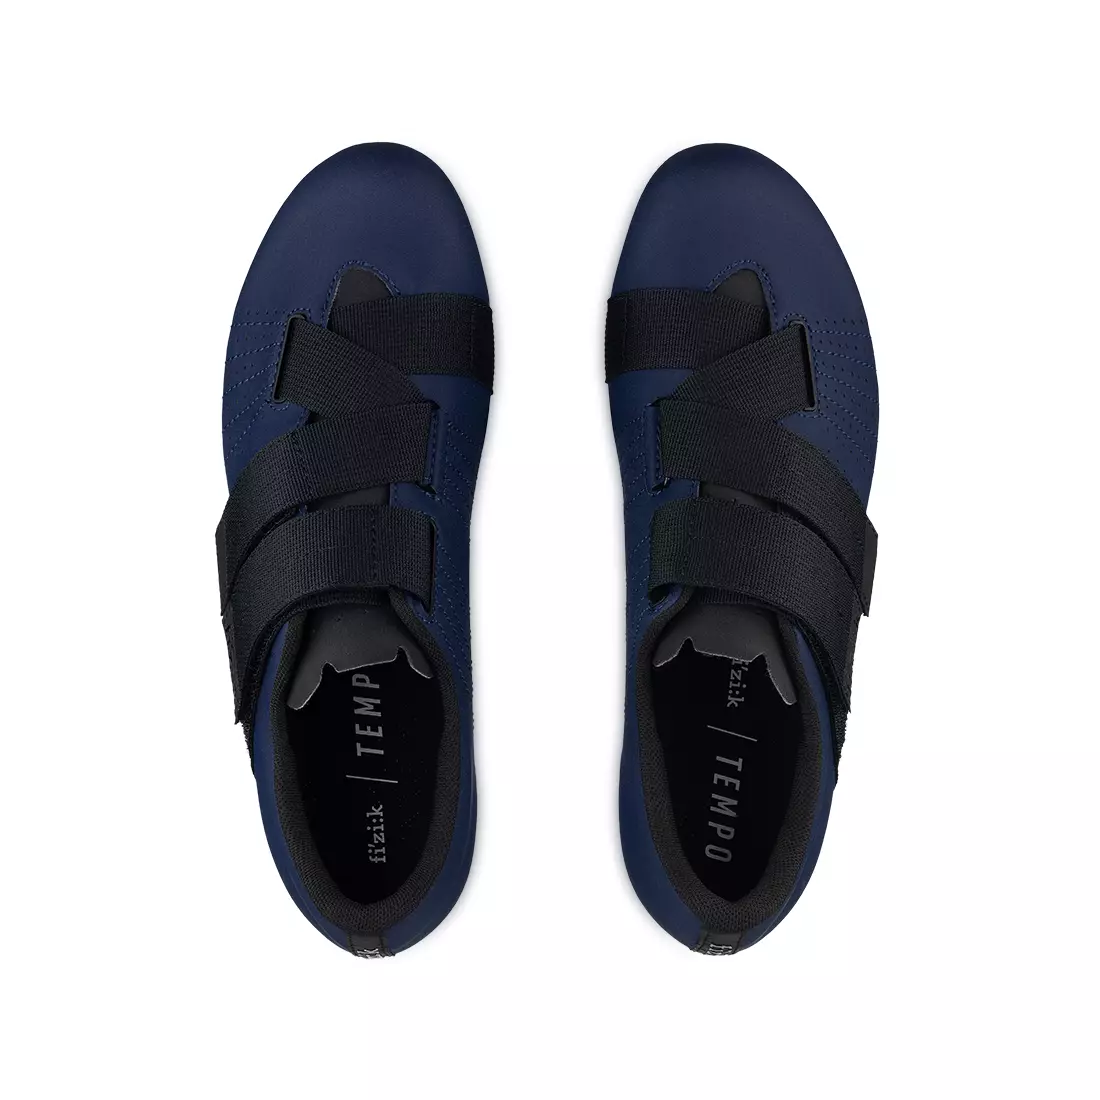 FIZIK TEMPO POWERSTRAP R5 road cycling shoes, navy blue